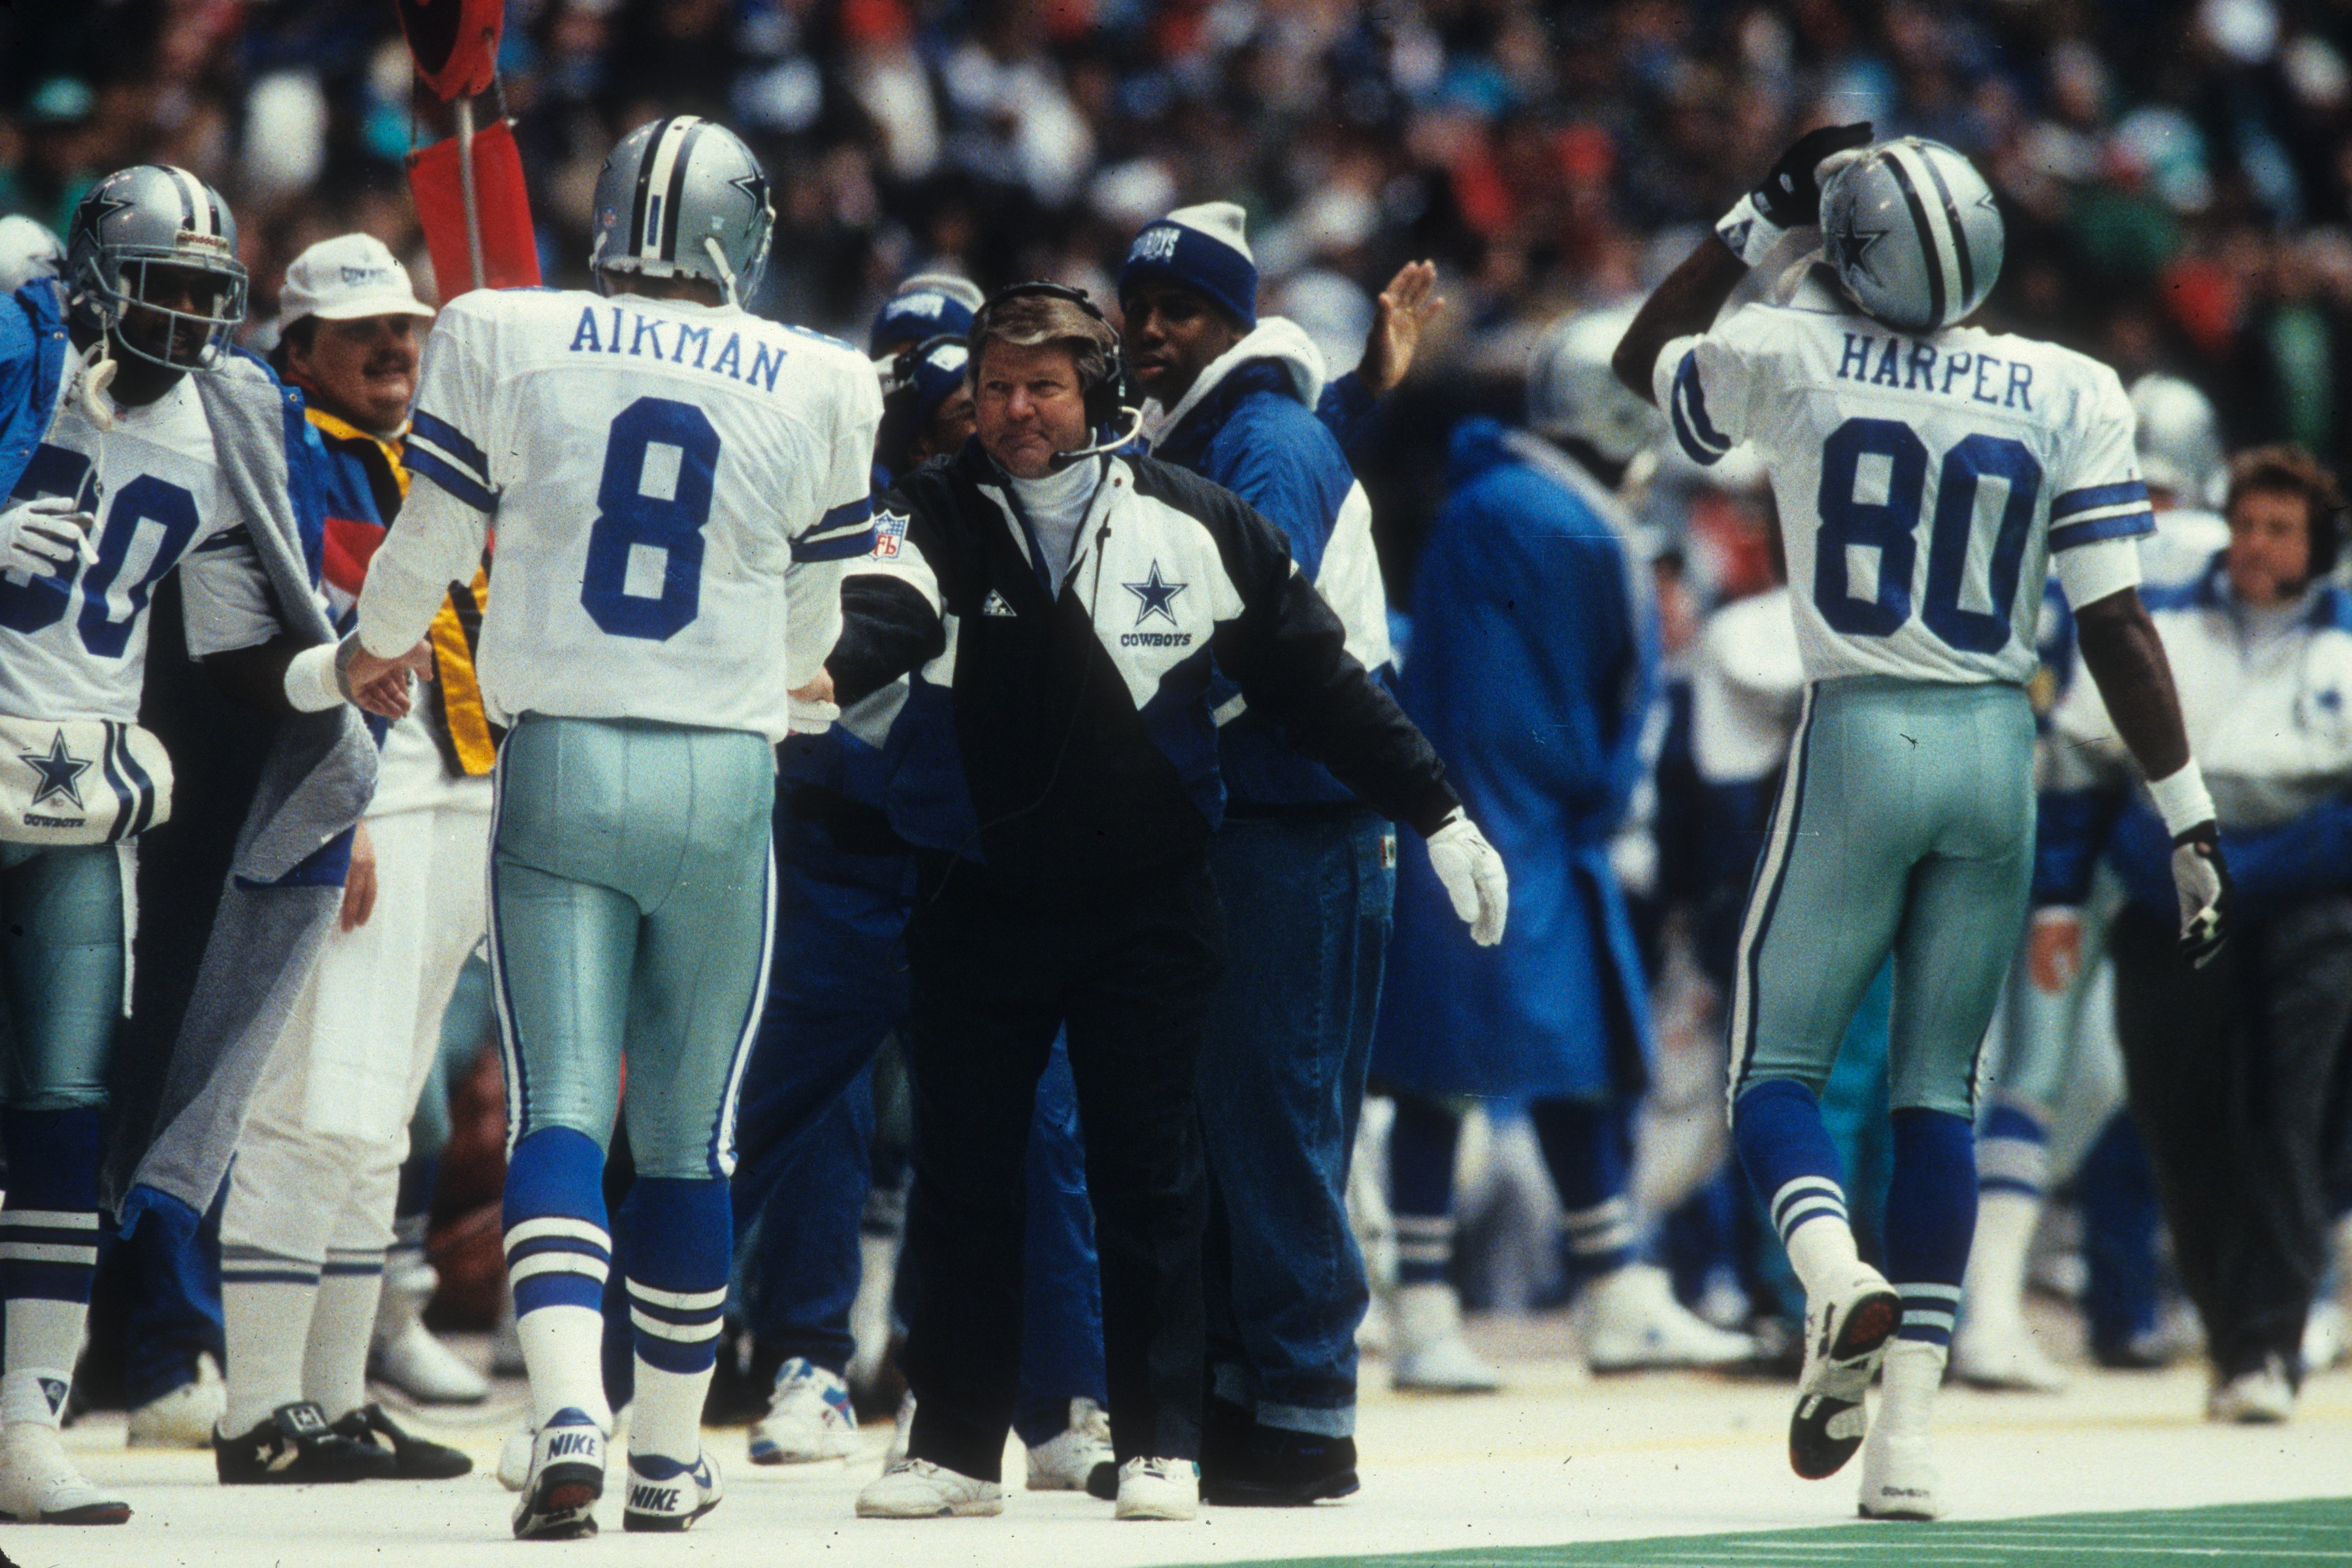 Troy Aikman and Jimmy Johnson talking on the sideline during a Cowboys game